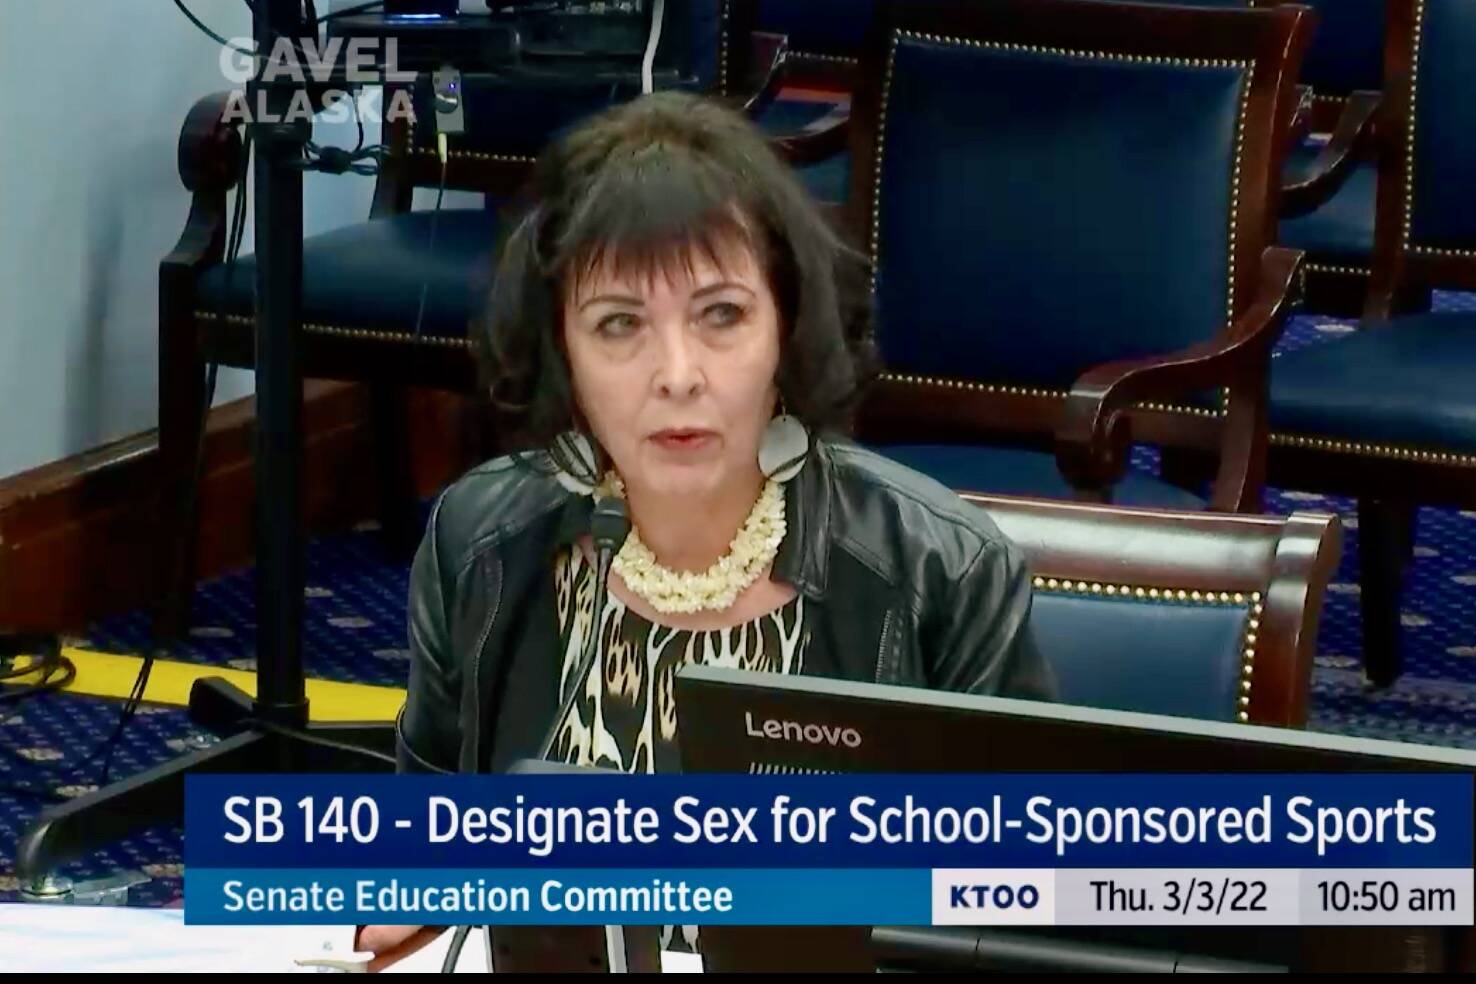 Sen. Shelley Hughes, R-Palmer, spoke to the Senate Education Committee on Thursday, March 3, 2022, regarding a bill that would prevent transgender athletes from competing as the sex they identify with. (Screenshot)